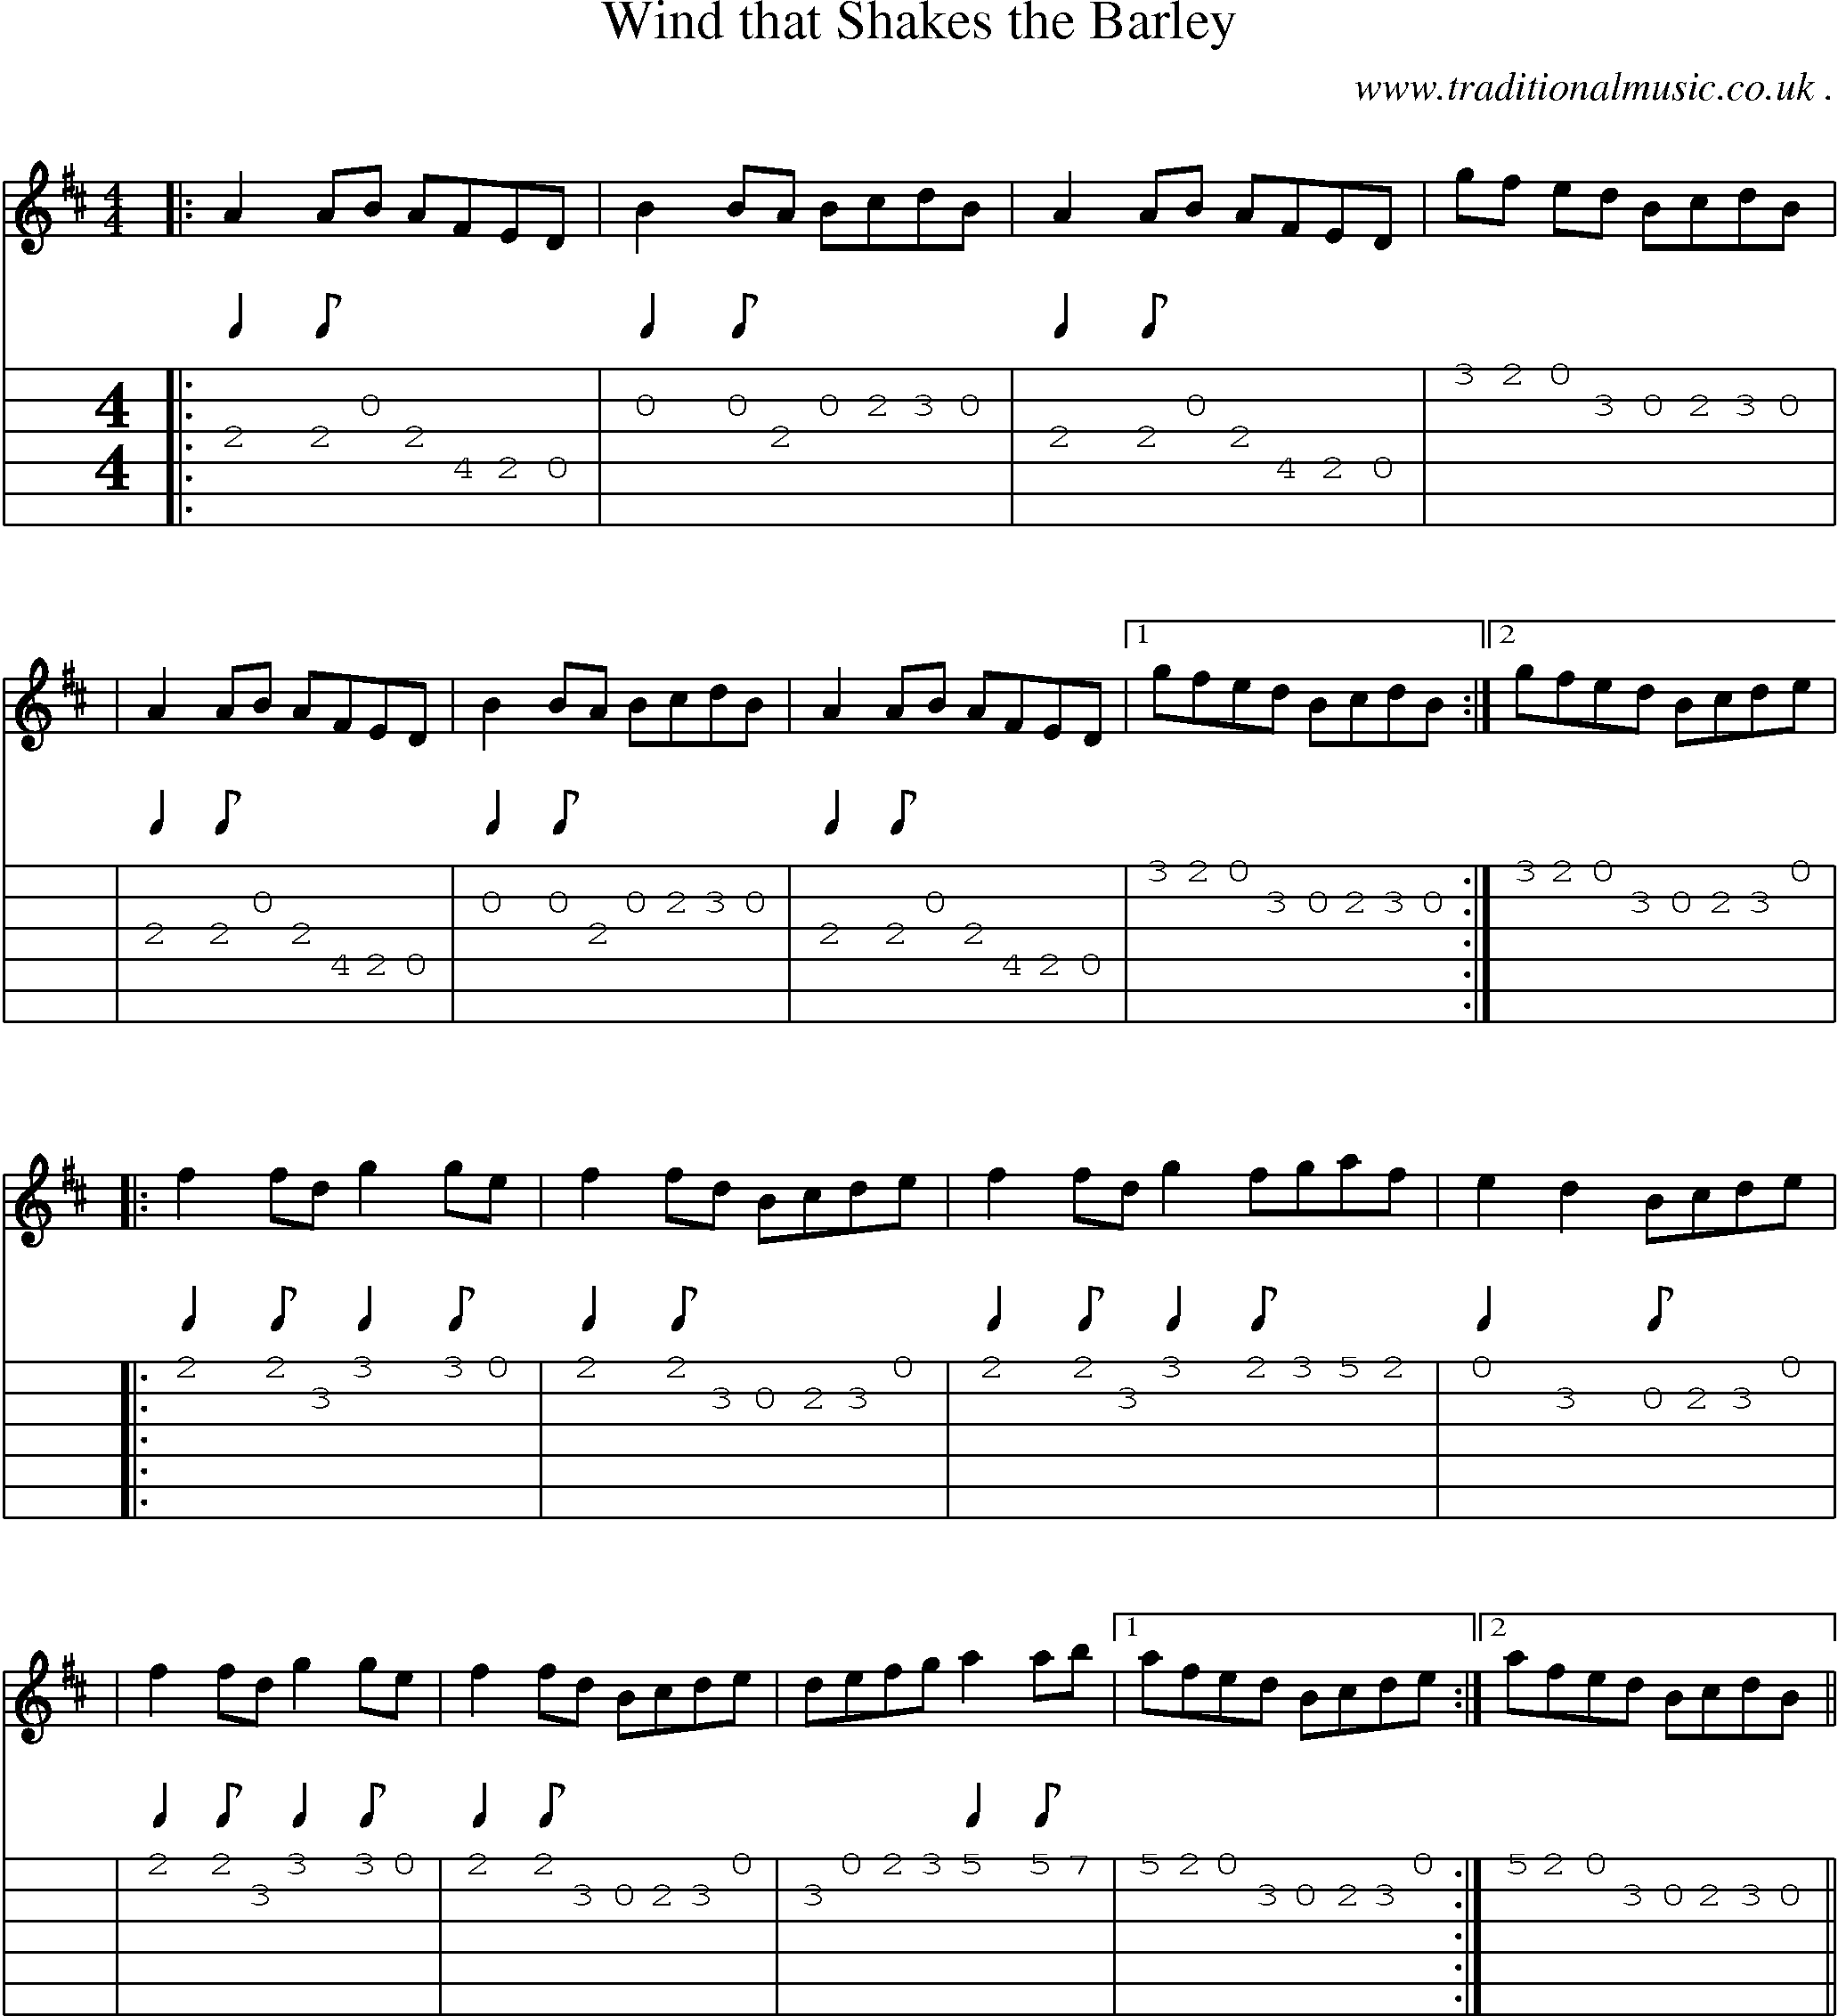 Sheet-Music and Guitar Tabs for Wind that Shakes the Barley 